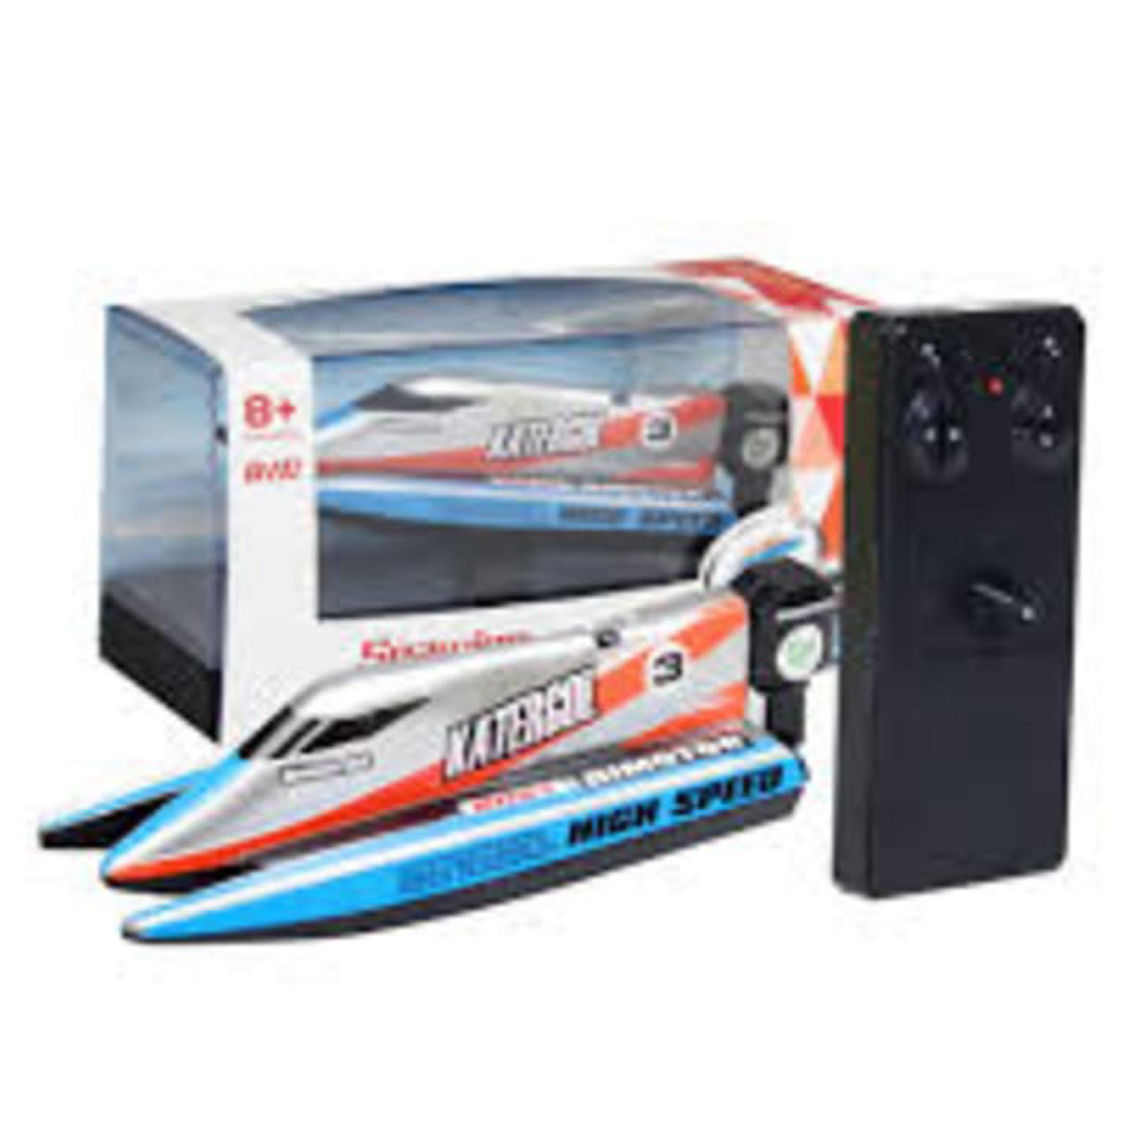 CIS-3313M-B Micro 2.4 Ghz Formula 1 speed boat with decals 2 colors Red and Blue - Image 3 of 5